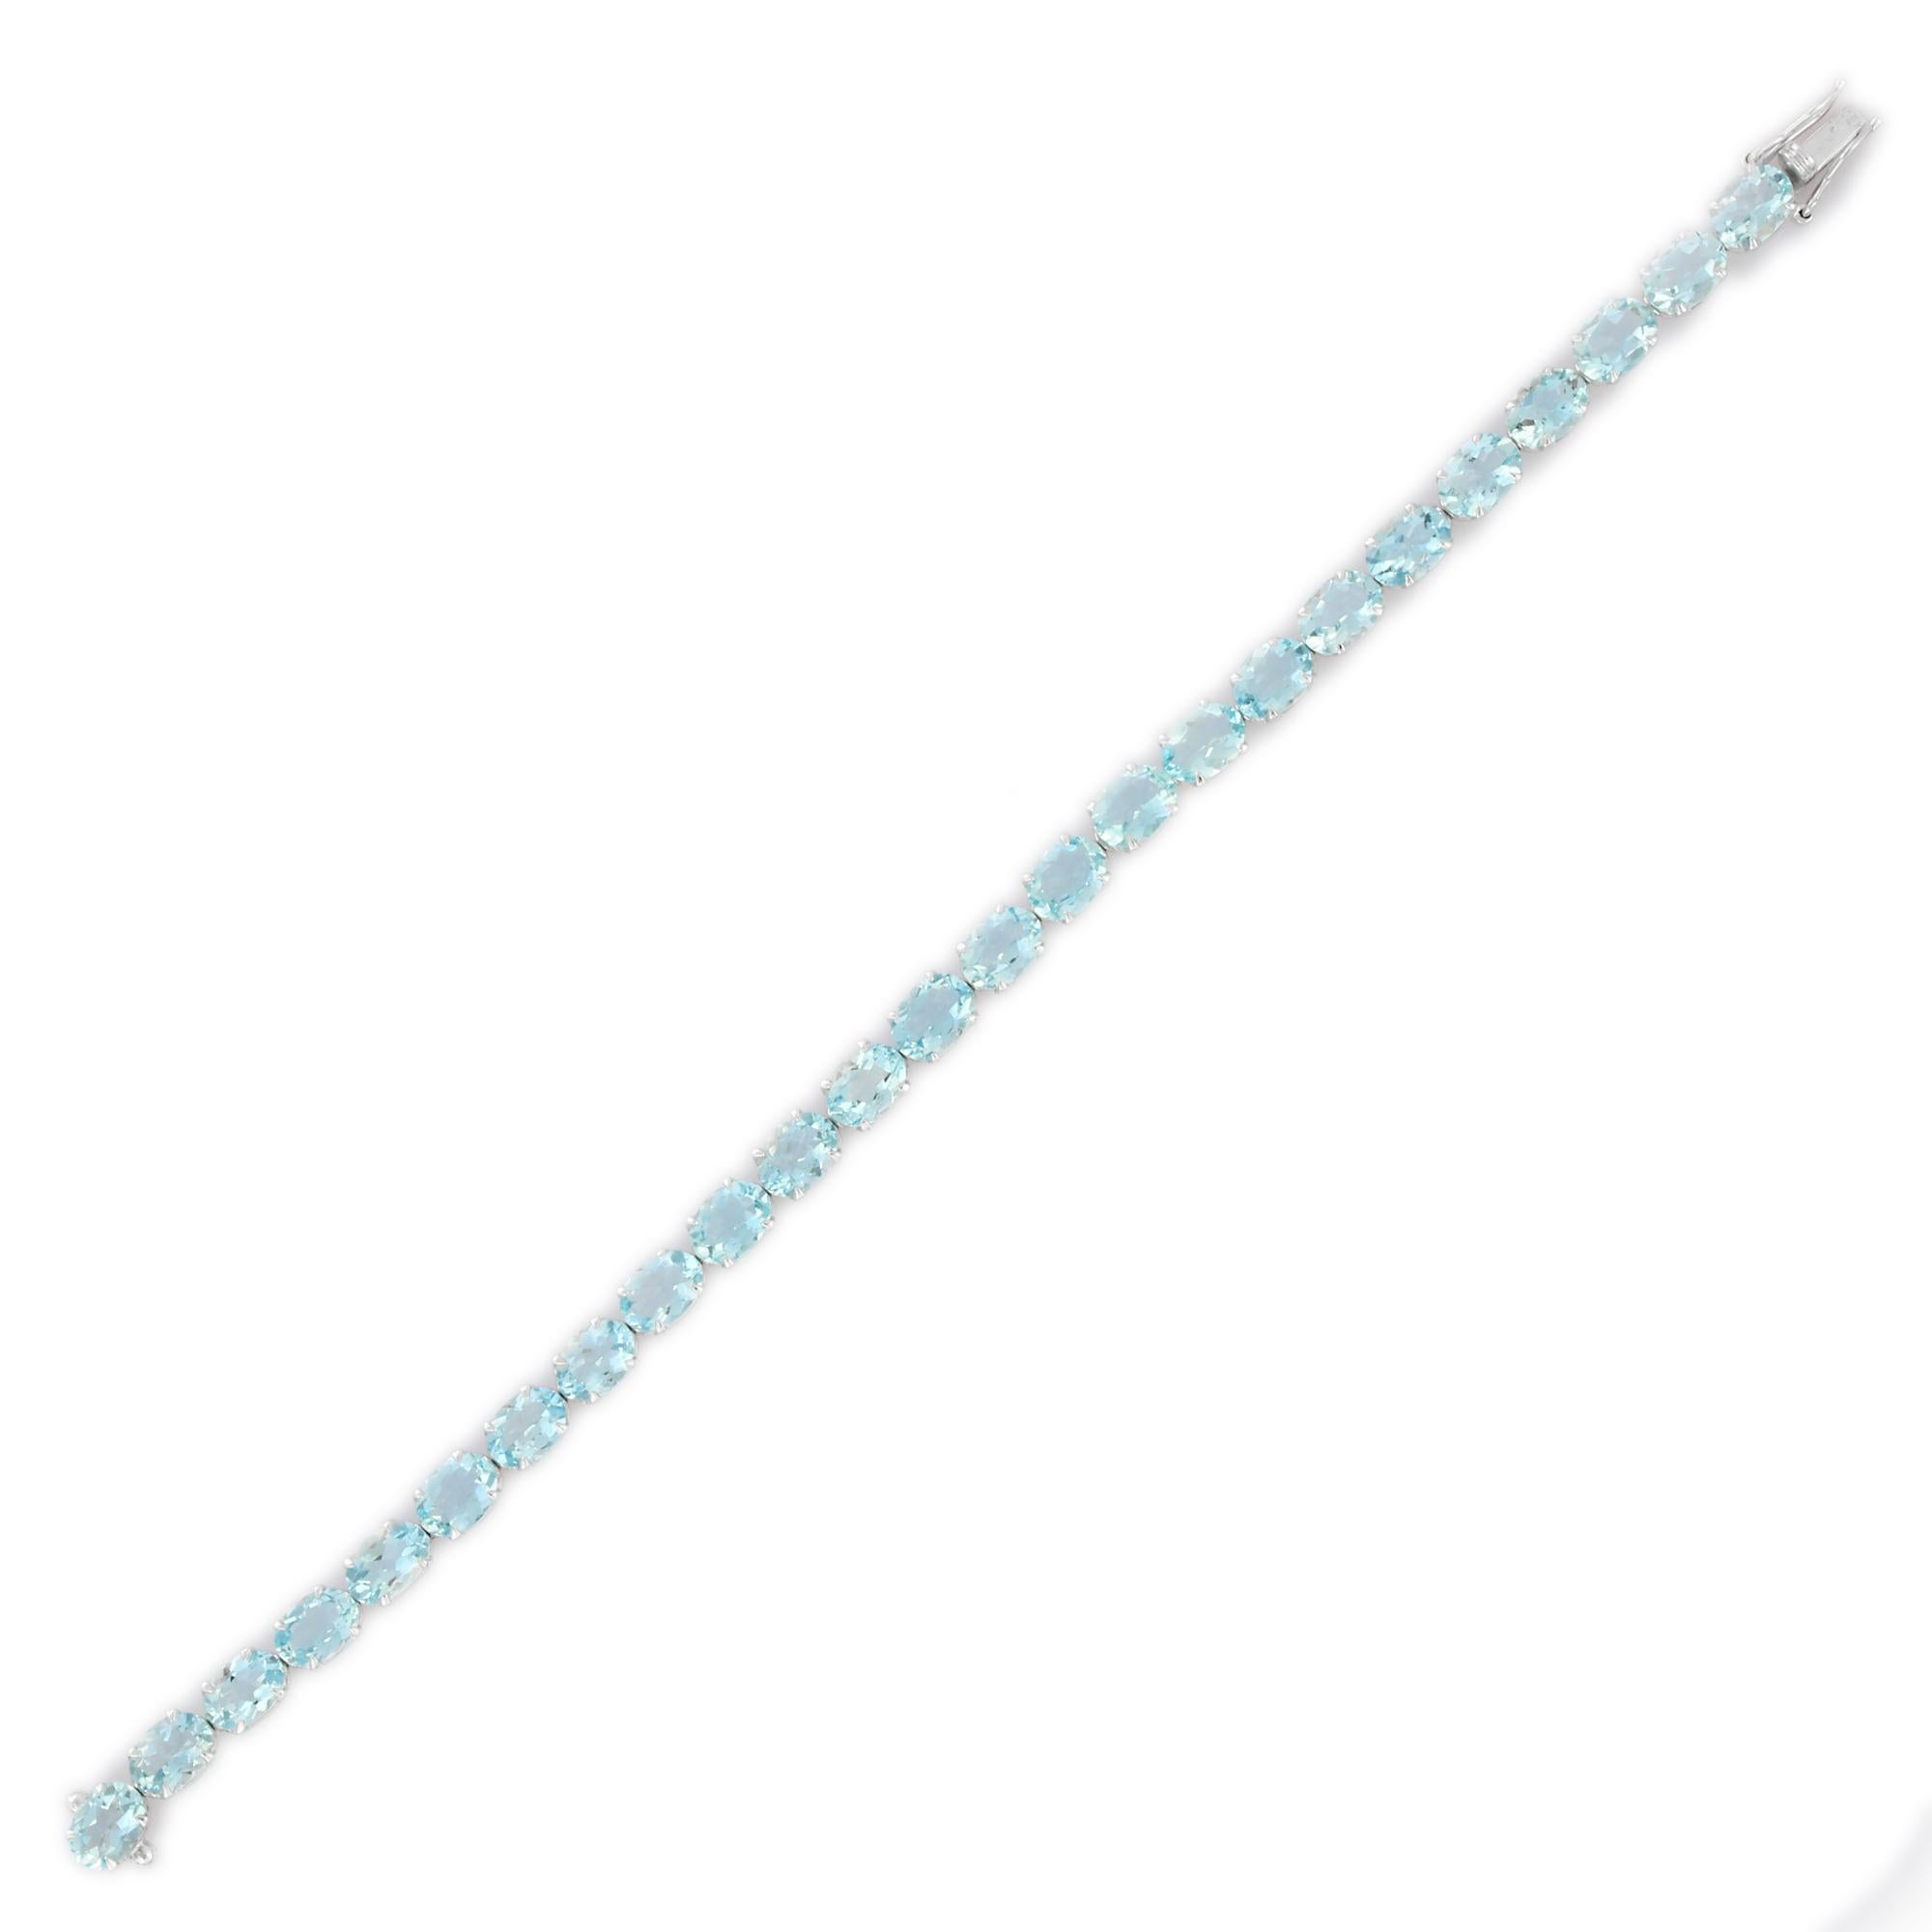 Aquamarine Tennis Bracelet in 18K Gold. It has a perfect oval cut gemstone to make you stand out on any occasion or an event. 
A tennis bracelet is an essential piece of jewelry when it comes to your wedding day. The sleek and elegant style